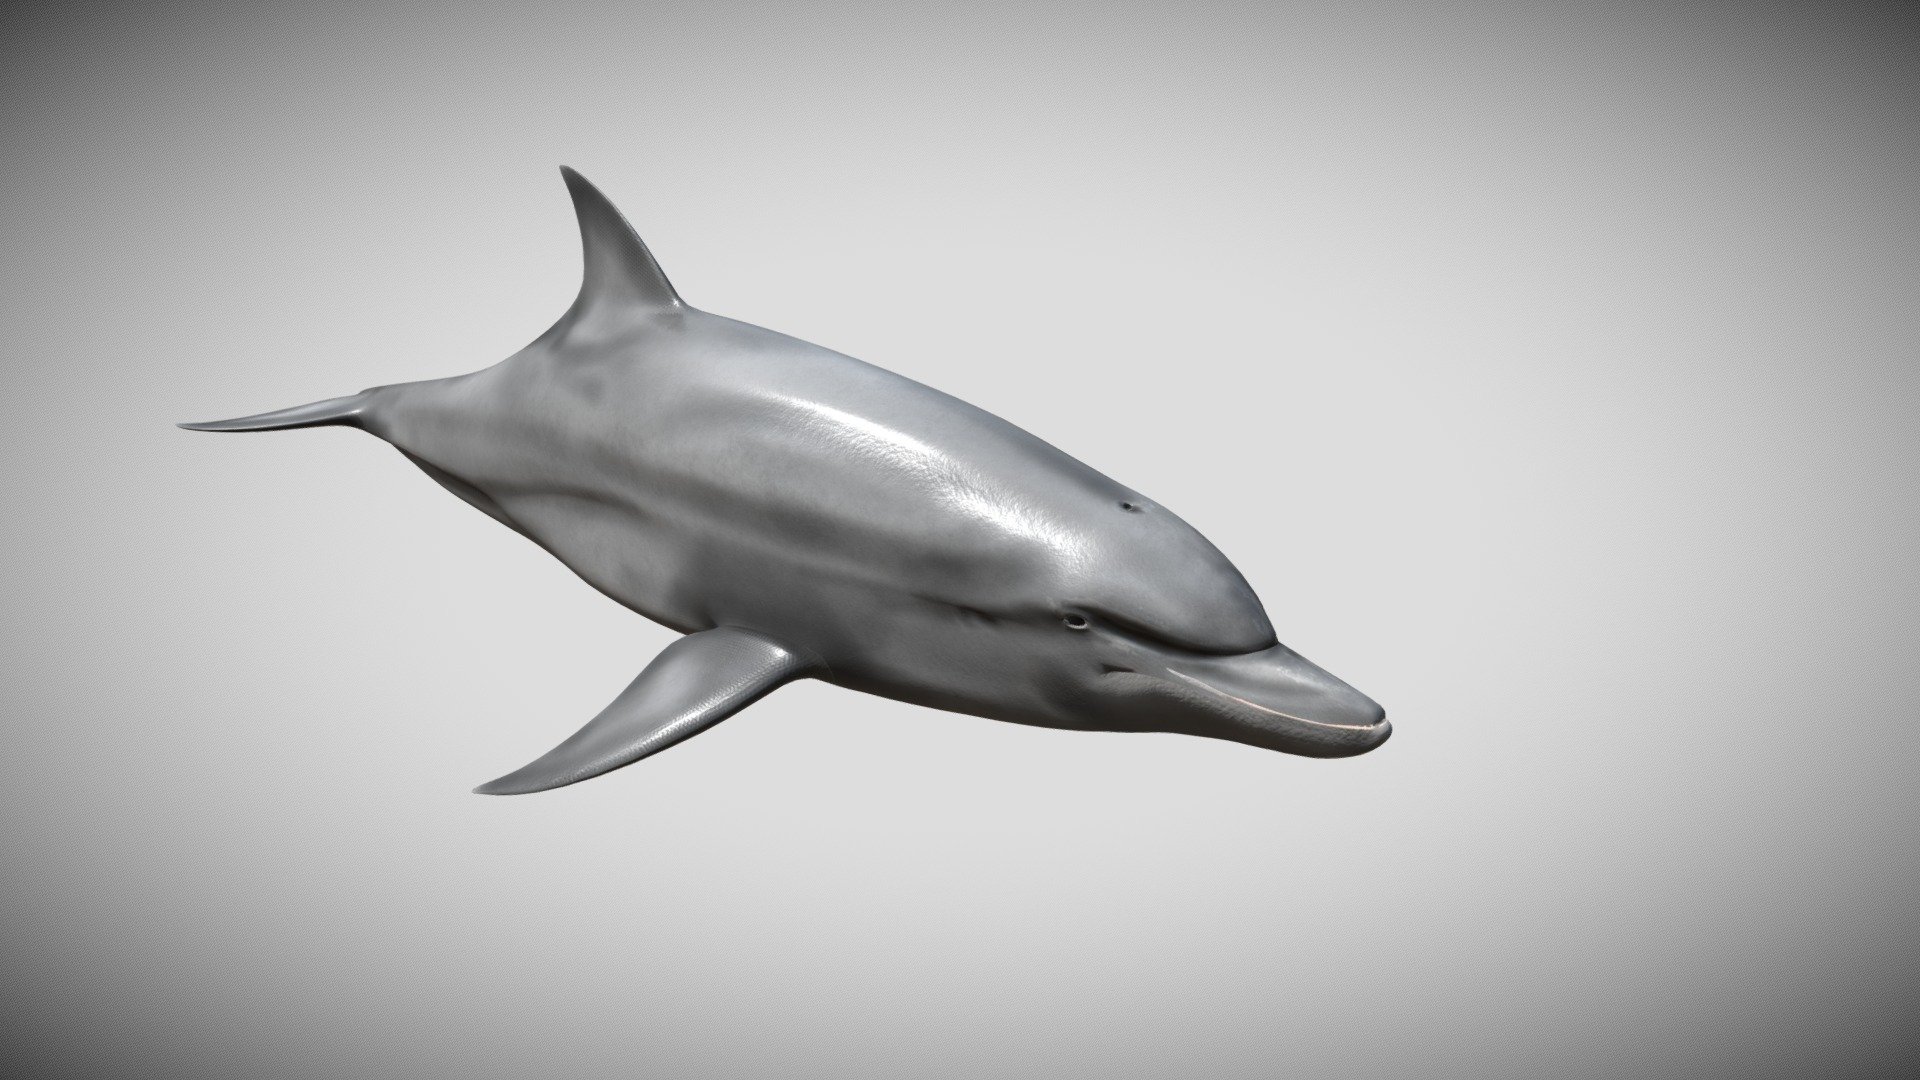 This is my rendition of a bottlenose dolphin, it has a bone structure but does not include any animations.  Textures are 4K and PBR for a great look in any program.

for simplicity the model has one primary texture including an albedo, roughness, normal, and diffuse channel.

The model is created natively in Cinema 4D completely in quads.

Other formats and additional subdivision (higher or lower) available on  request.  Check out my other models if you like this one 3d model